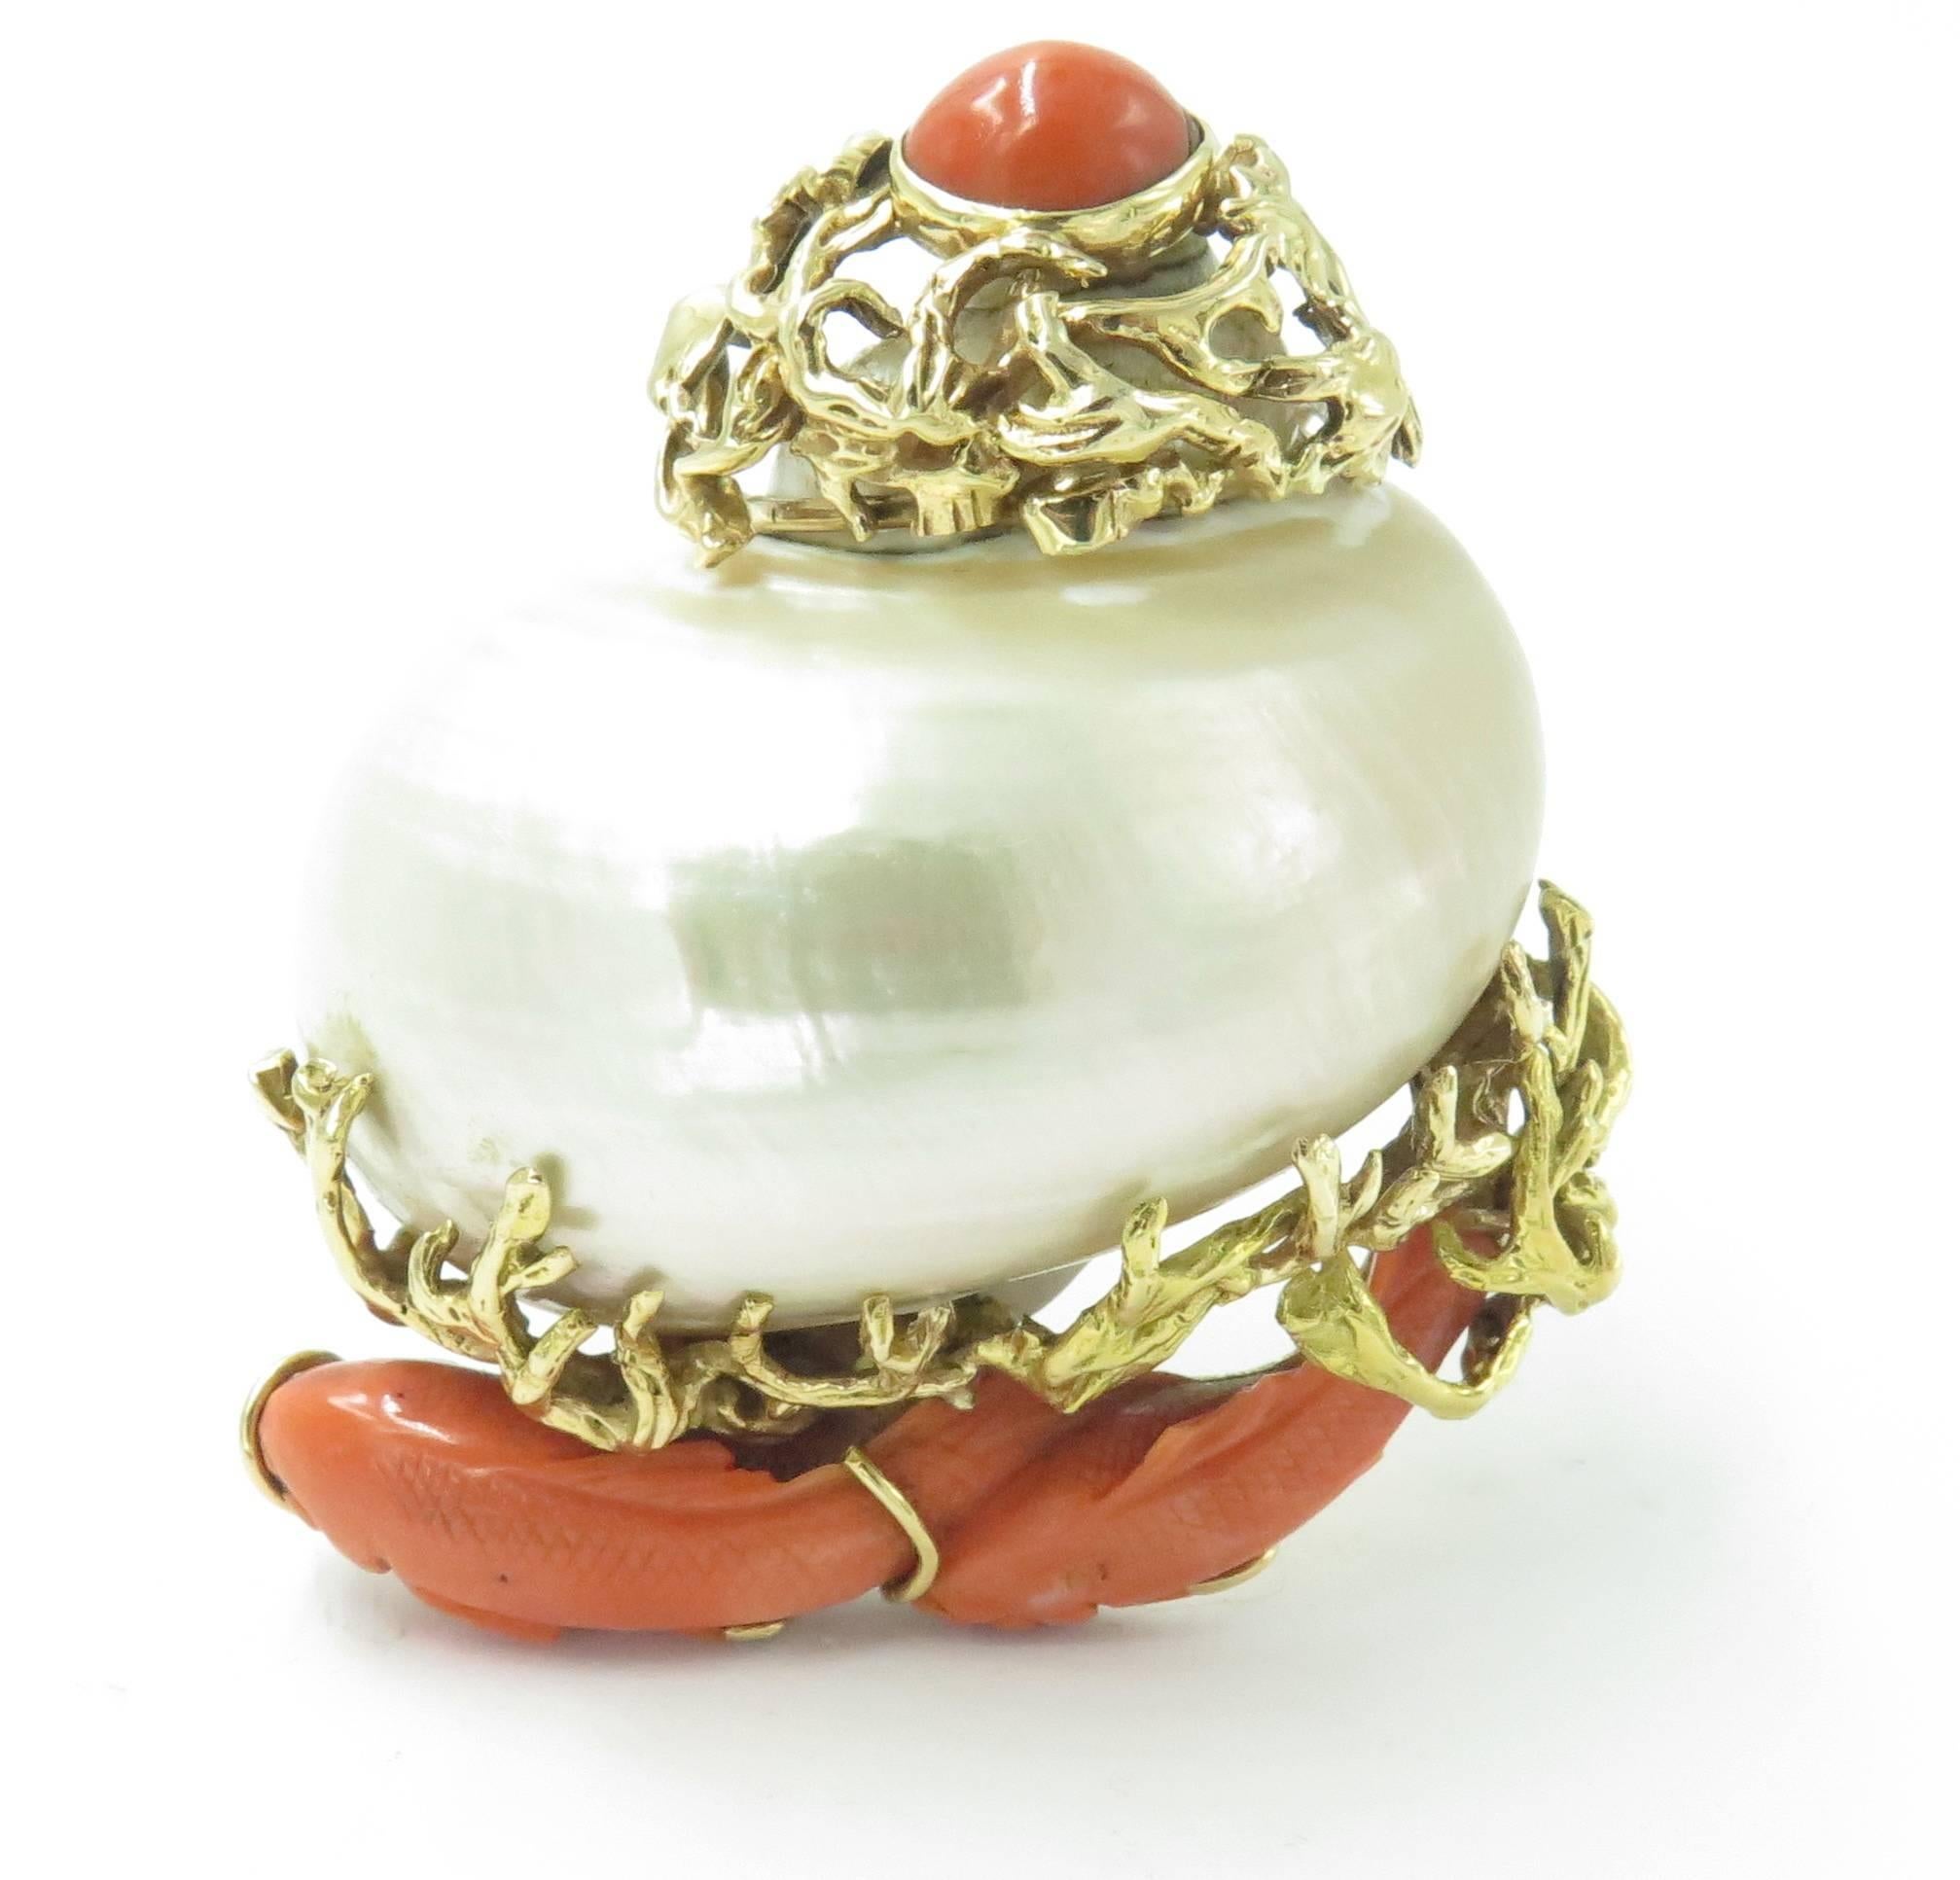 A 14 karat yellow gold, shell and coral brooch, Seaman Schepps. Circa 1960. Set with a large white turbo shell, enhanced by carved coral koi fish and textured gold seaweed, the top set with an oval coral cabochon, measuring approximately 10.00mm.